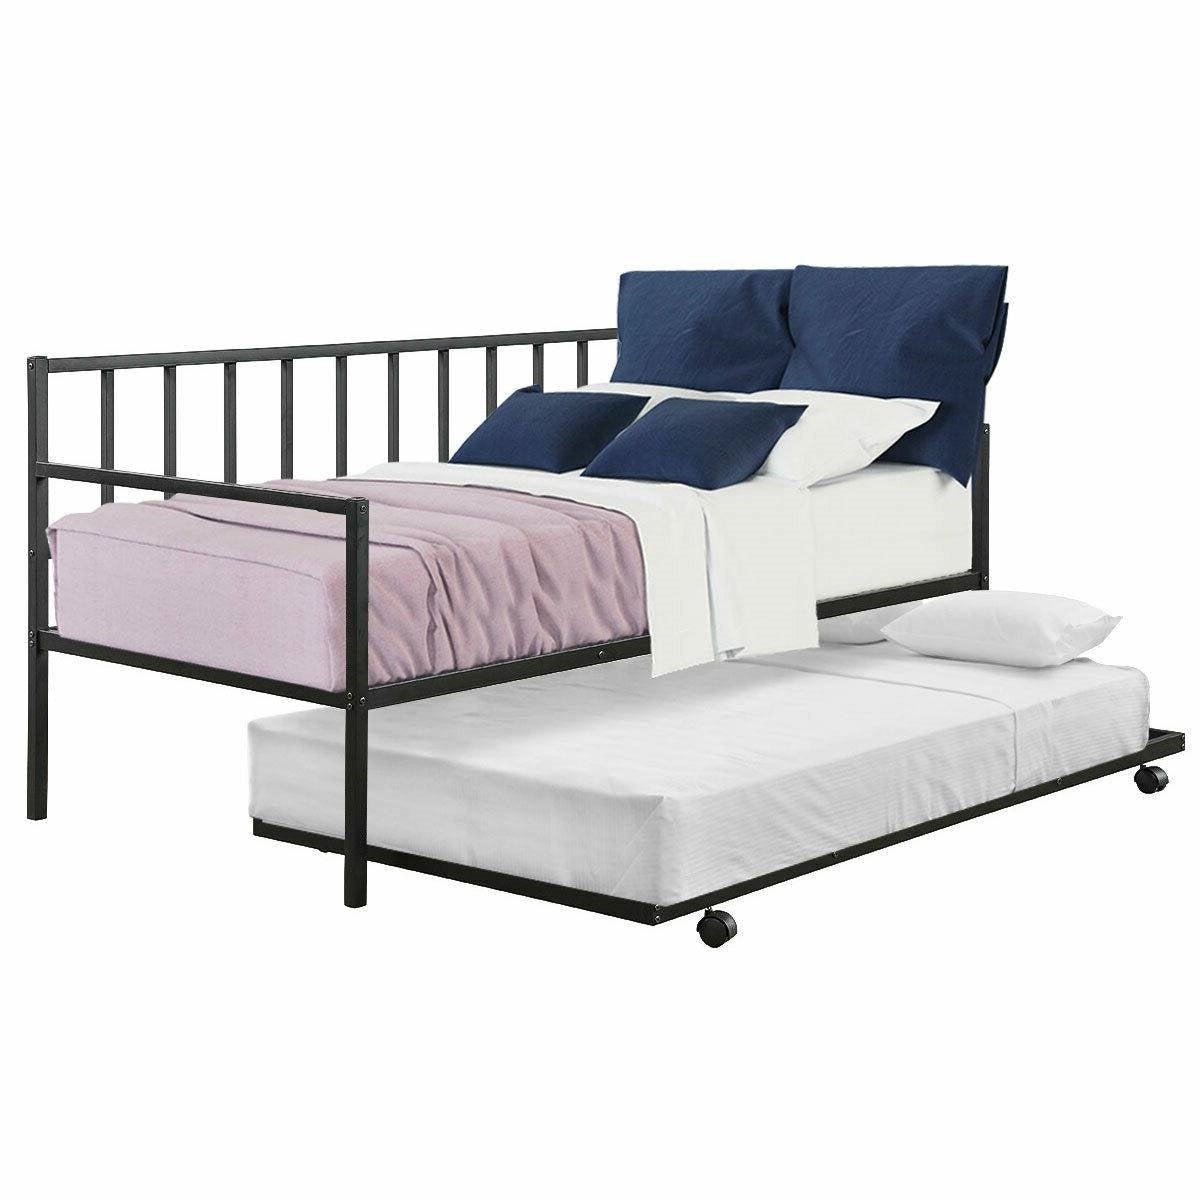 Twin size Black Metal Daybed with Roll-out Trundle Bed Frame